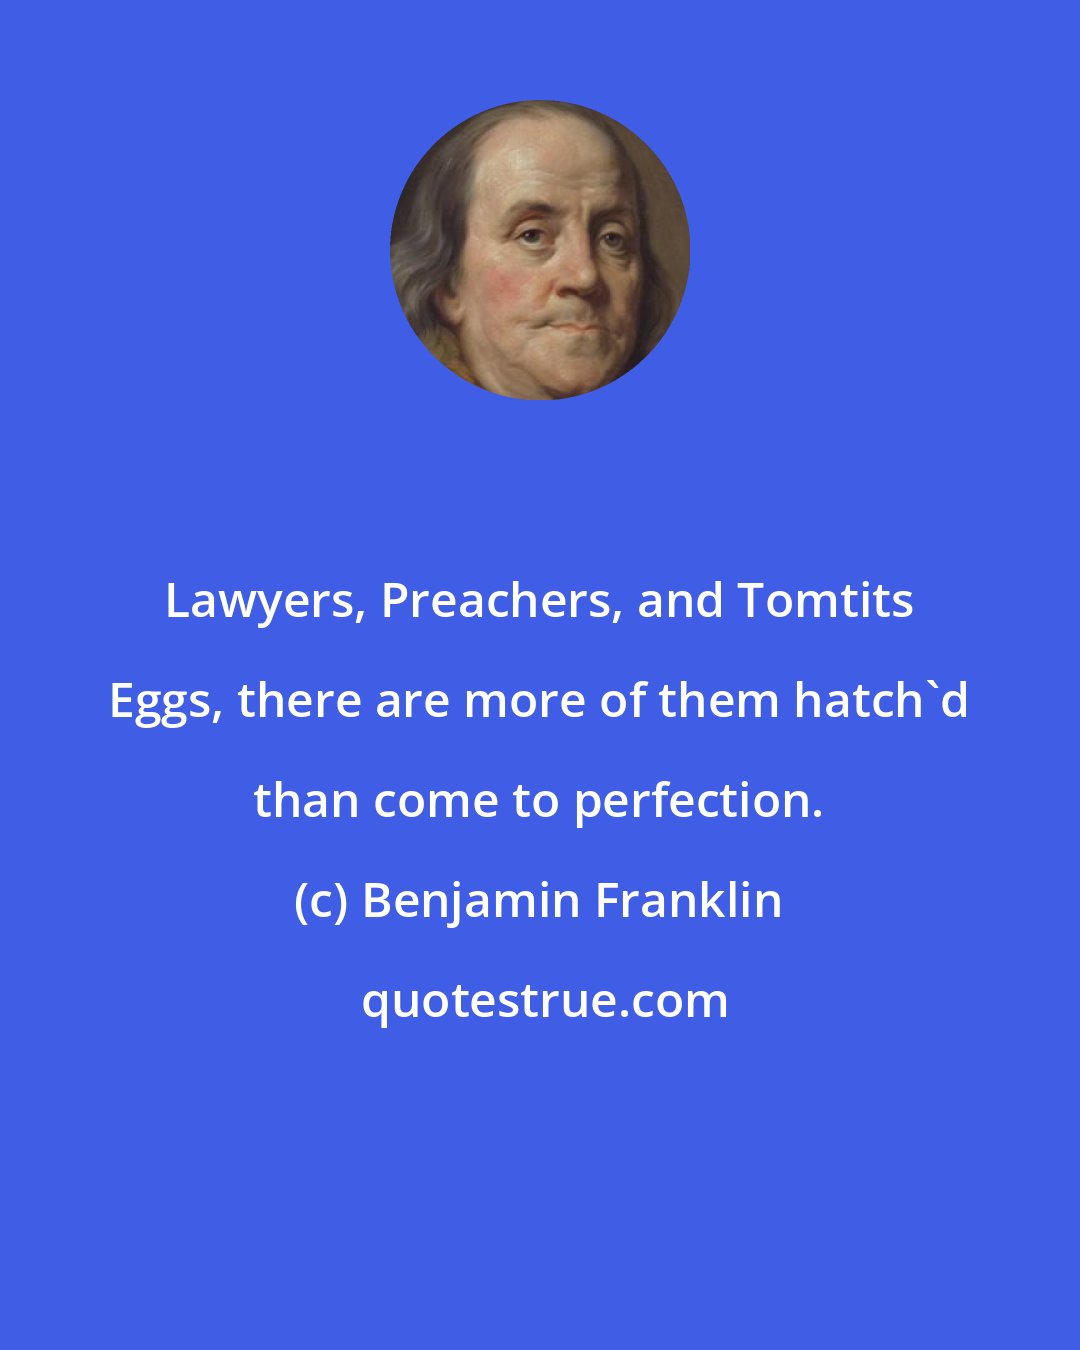 Benjamin Franklin: Lawyers, Preachers, and Tomtits Eggs, there are more of them hatch'd than come to perfection.